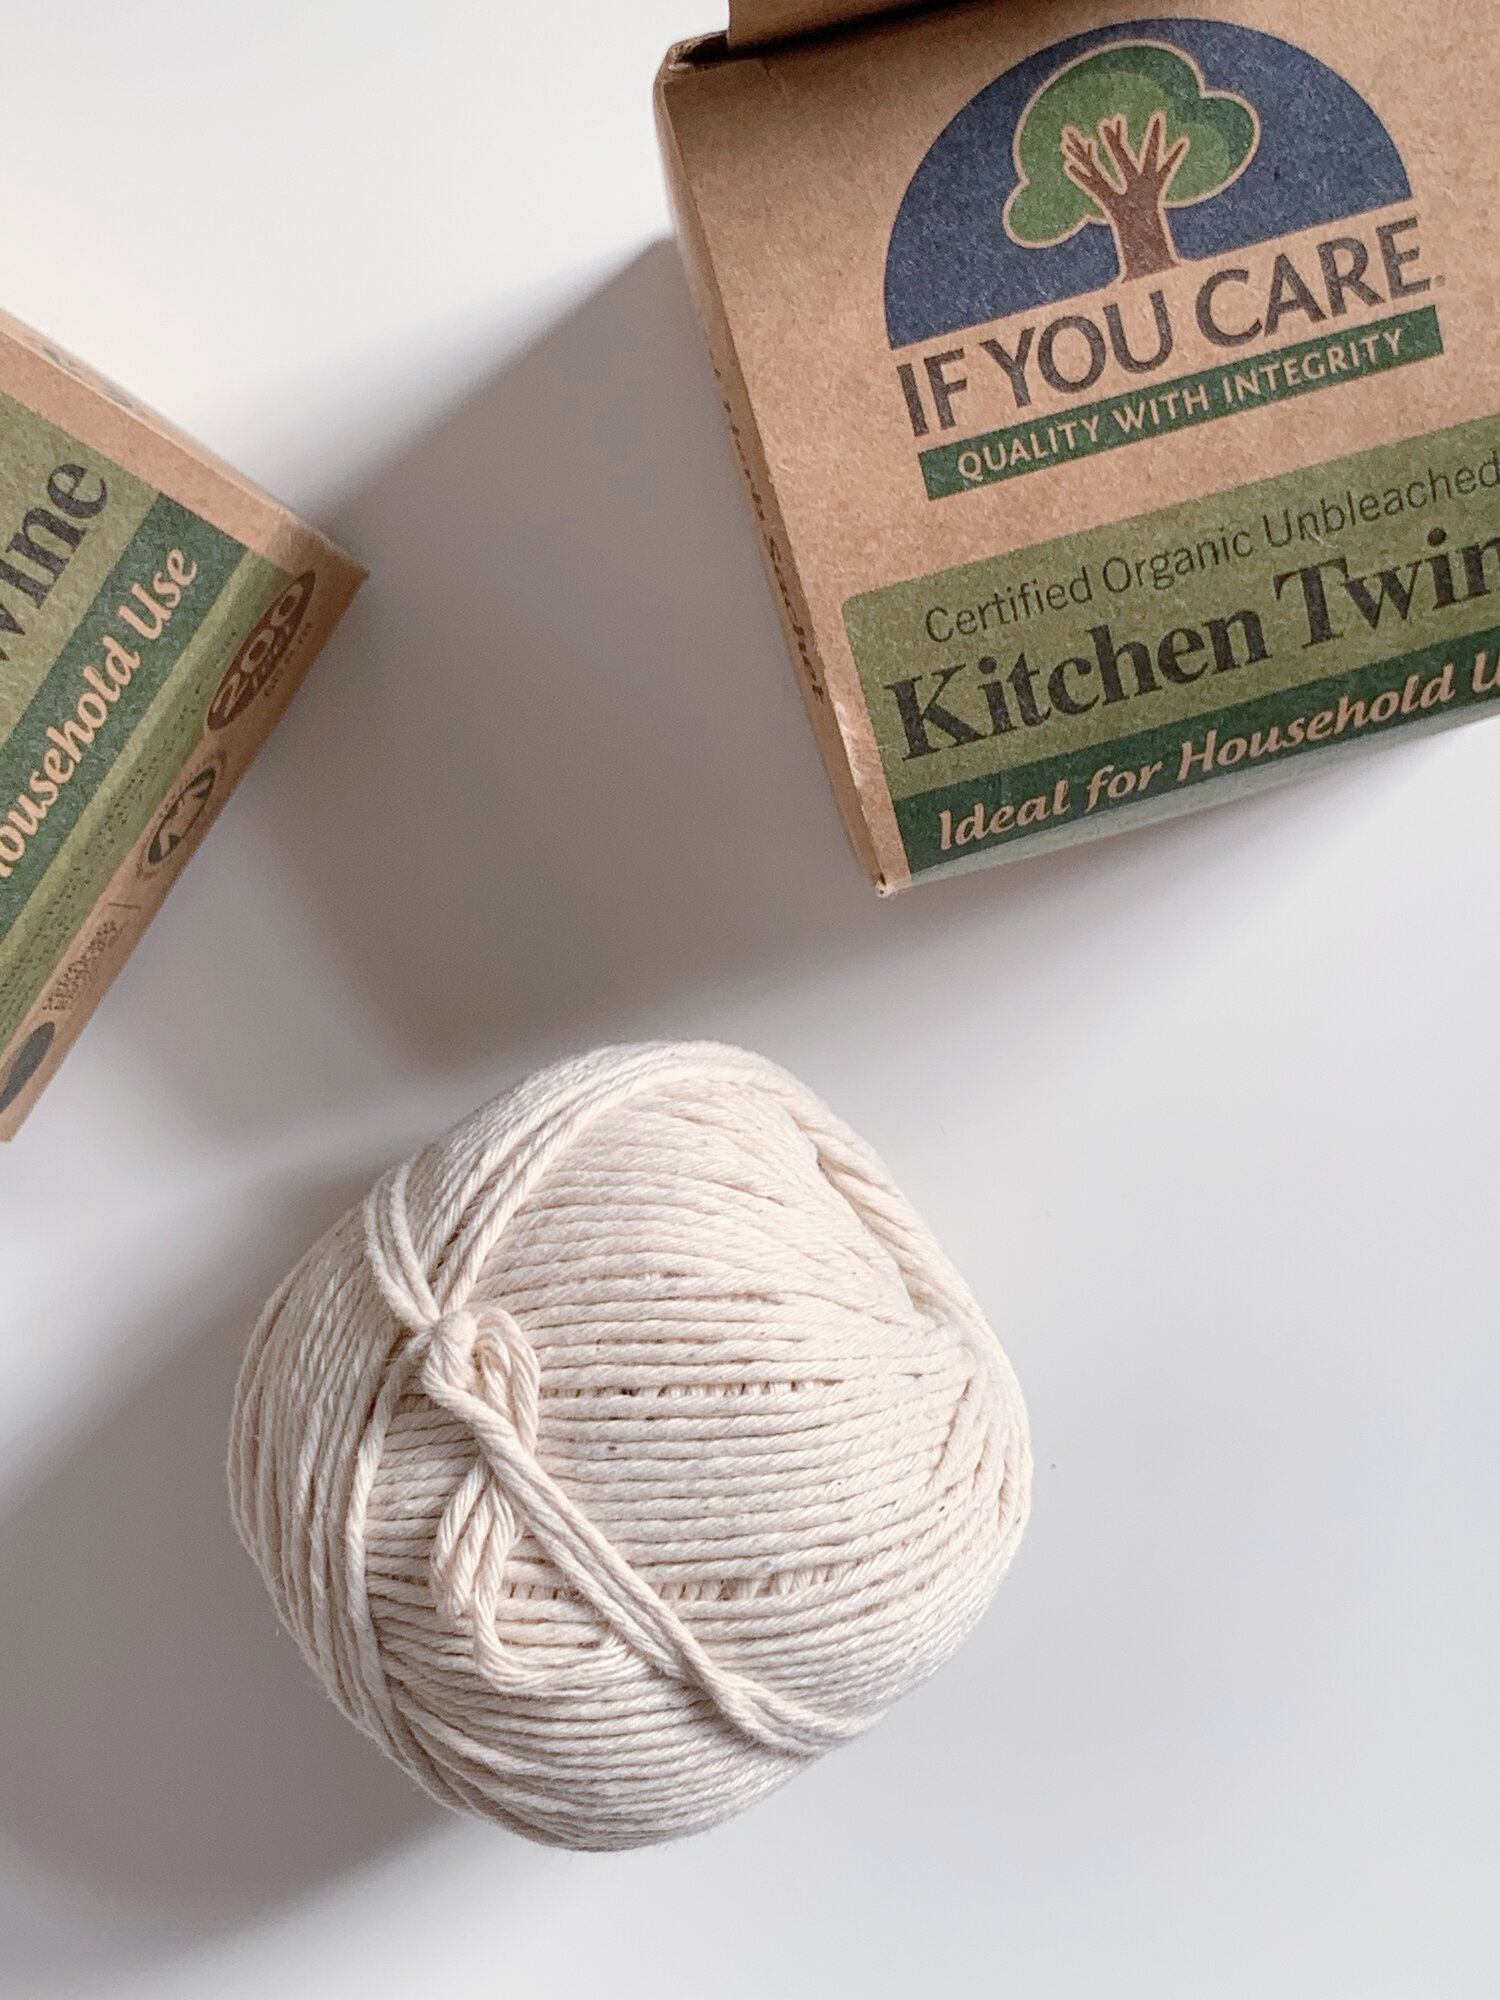 Natural Cooking Twine, Organic, 200ft - If You Care